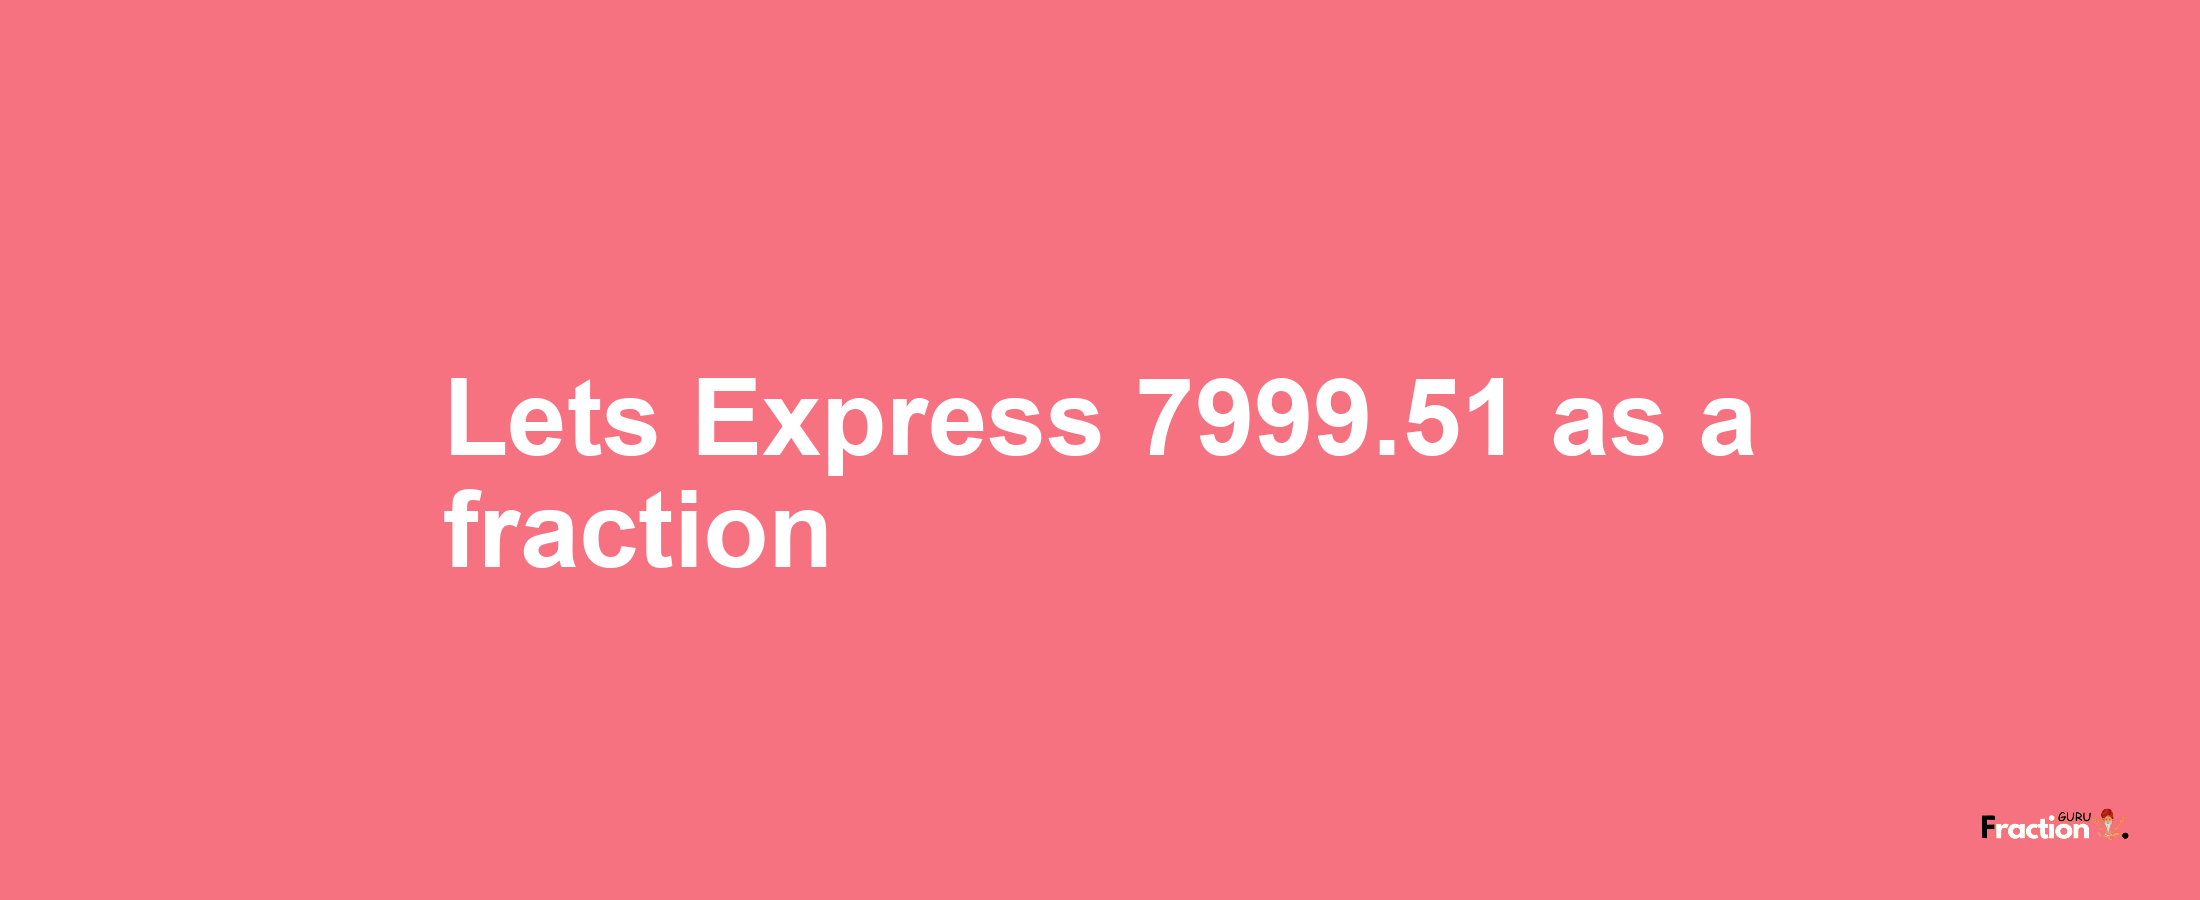 Lets Express 7999.51 as afraction